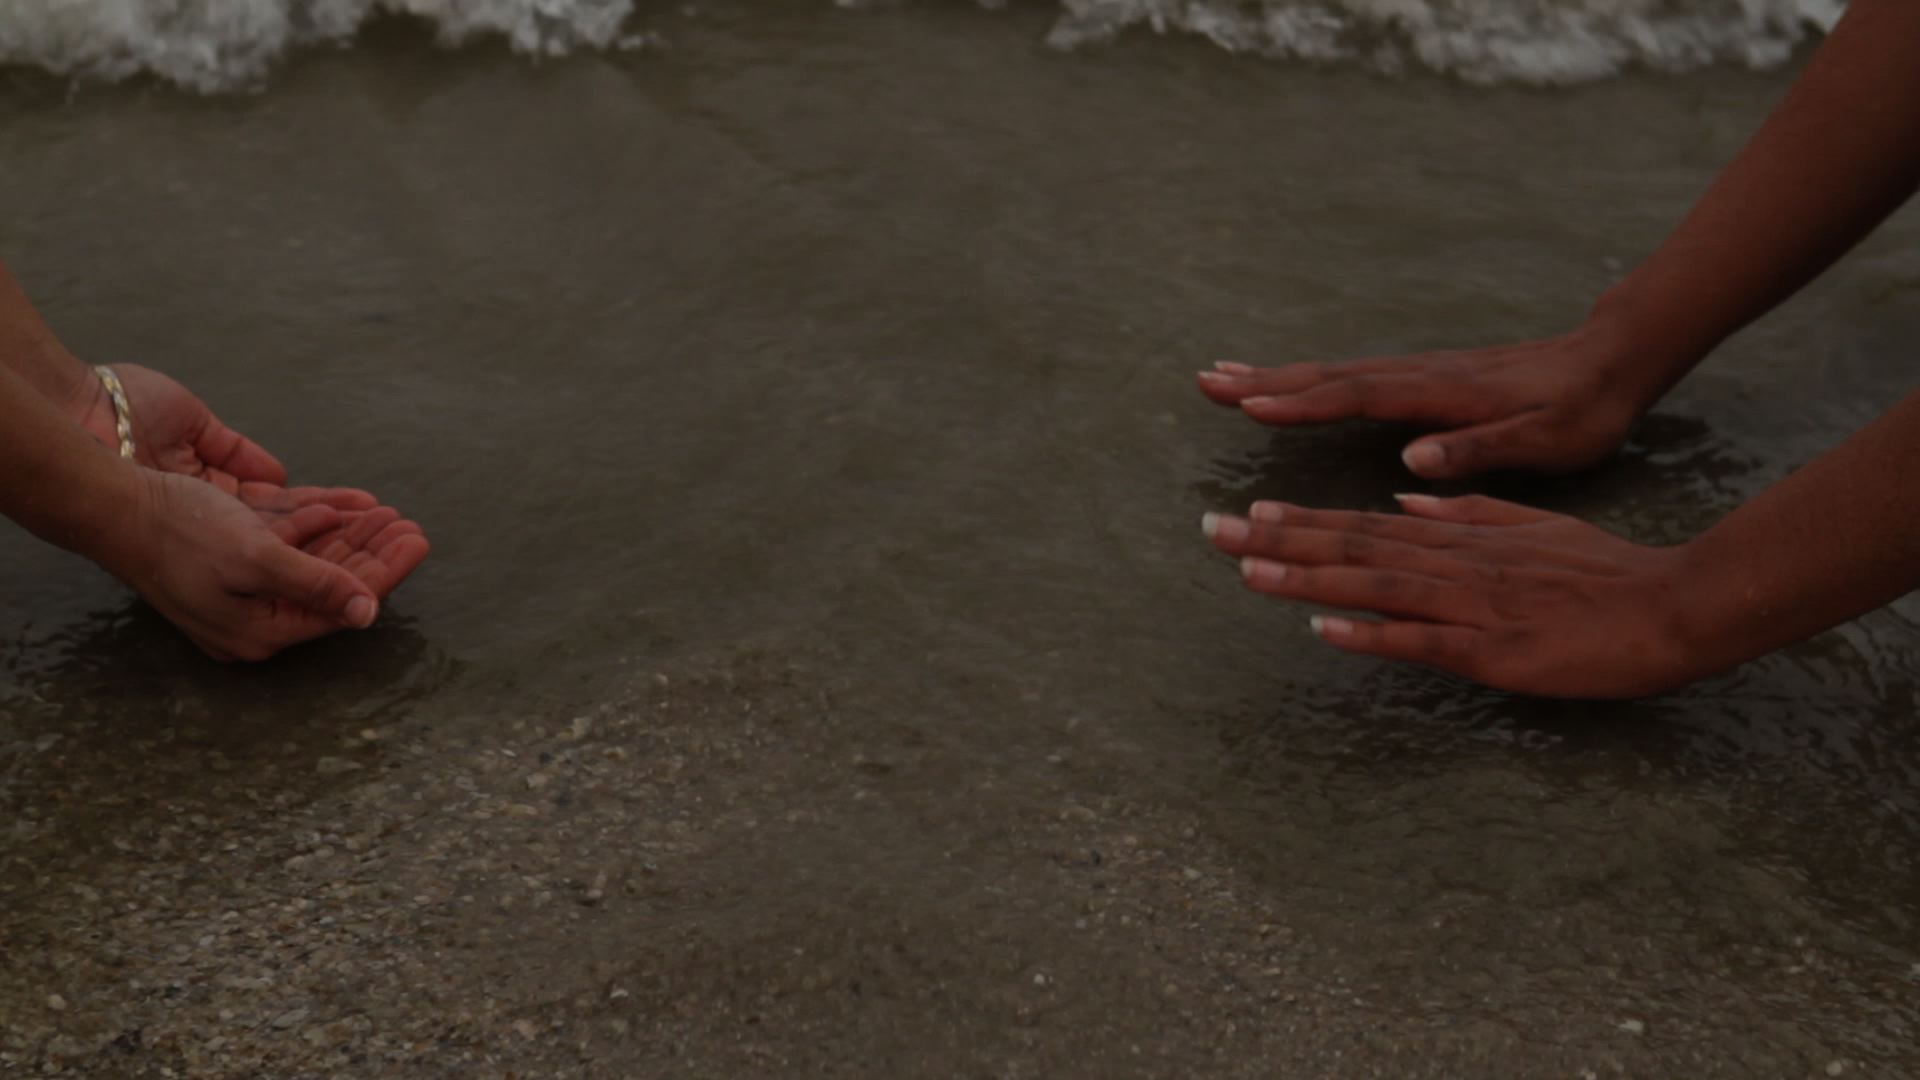 Photographic image of two sets of hands, one lifting up and the other pushing down, at the sand near the edge of the waves